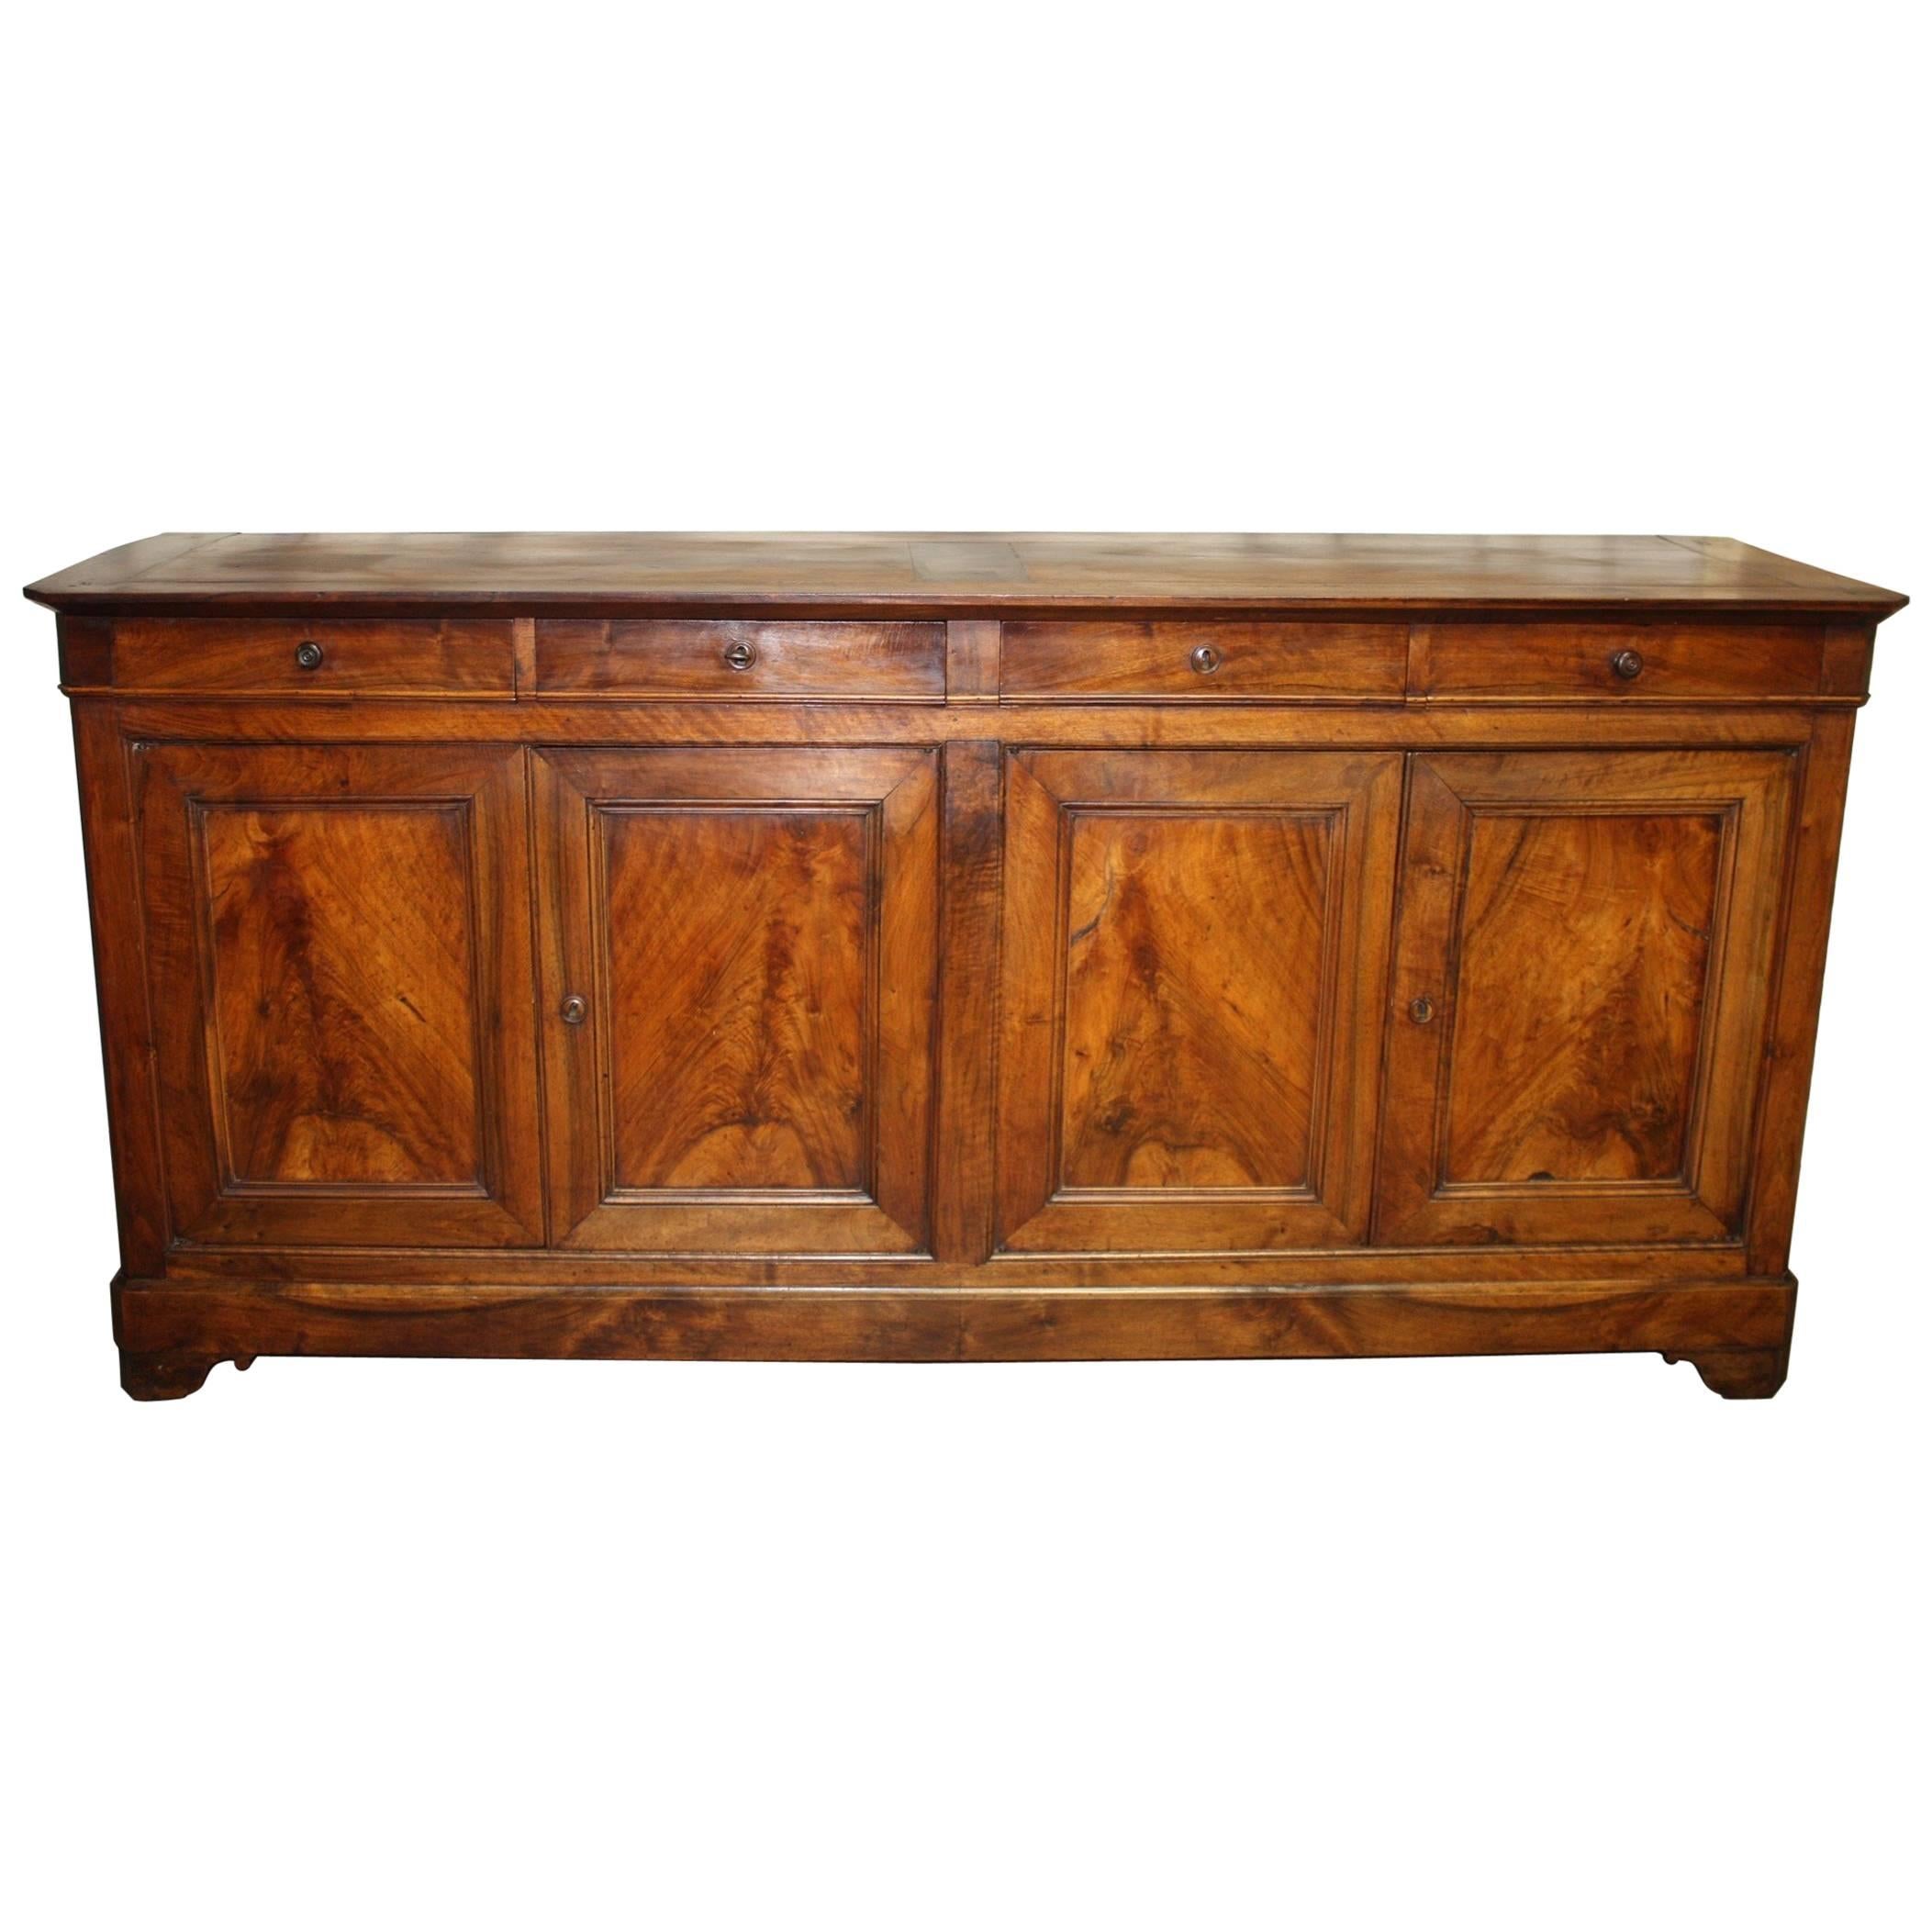 Mid-19th Century French Sideboard